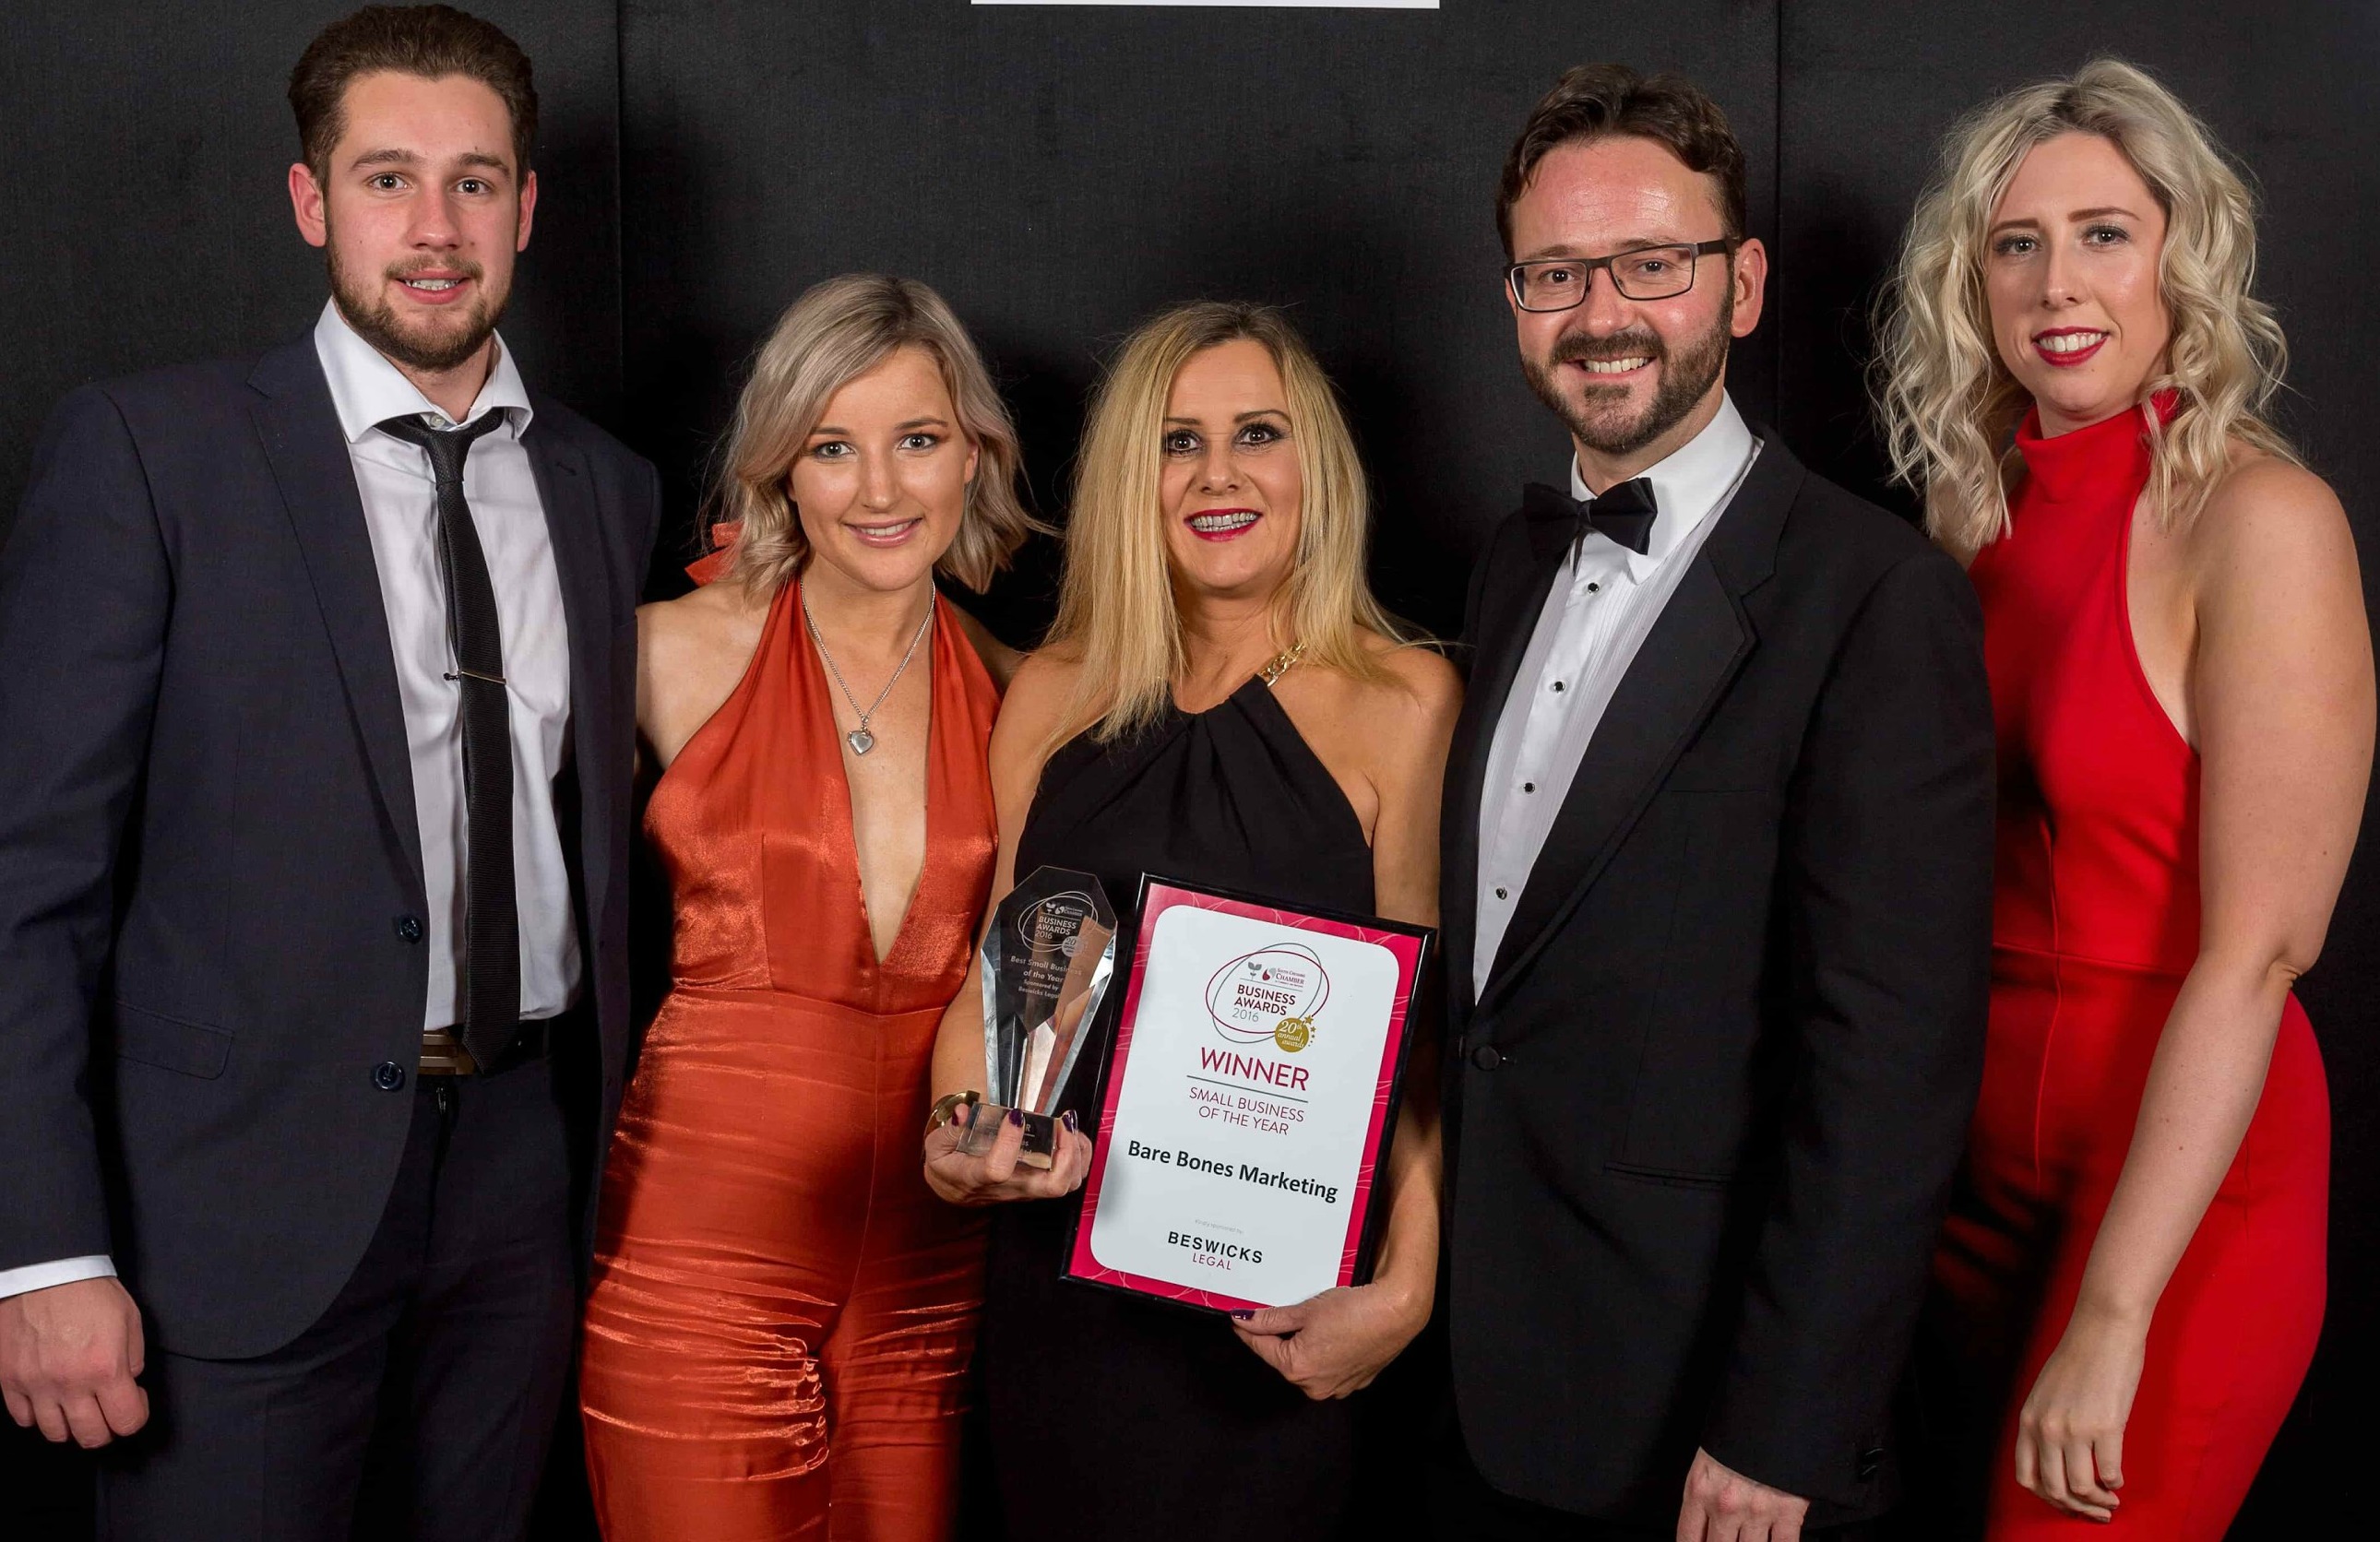 Bare Bones Marketing - Business of the Year